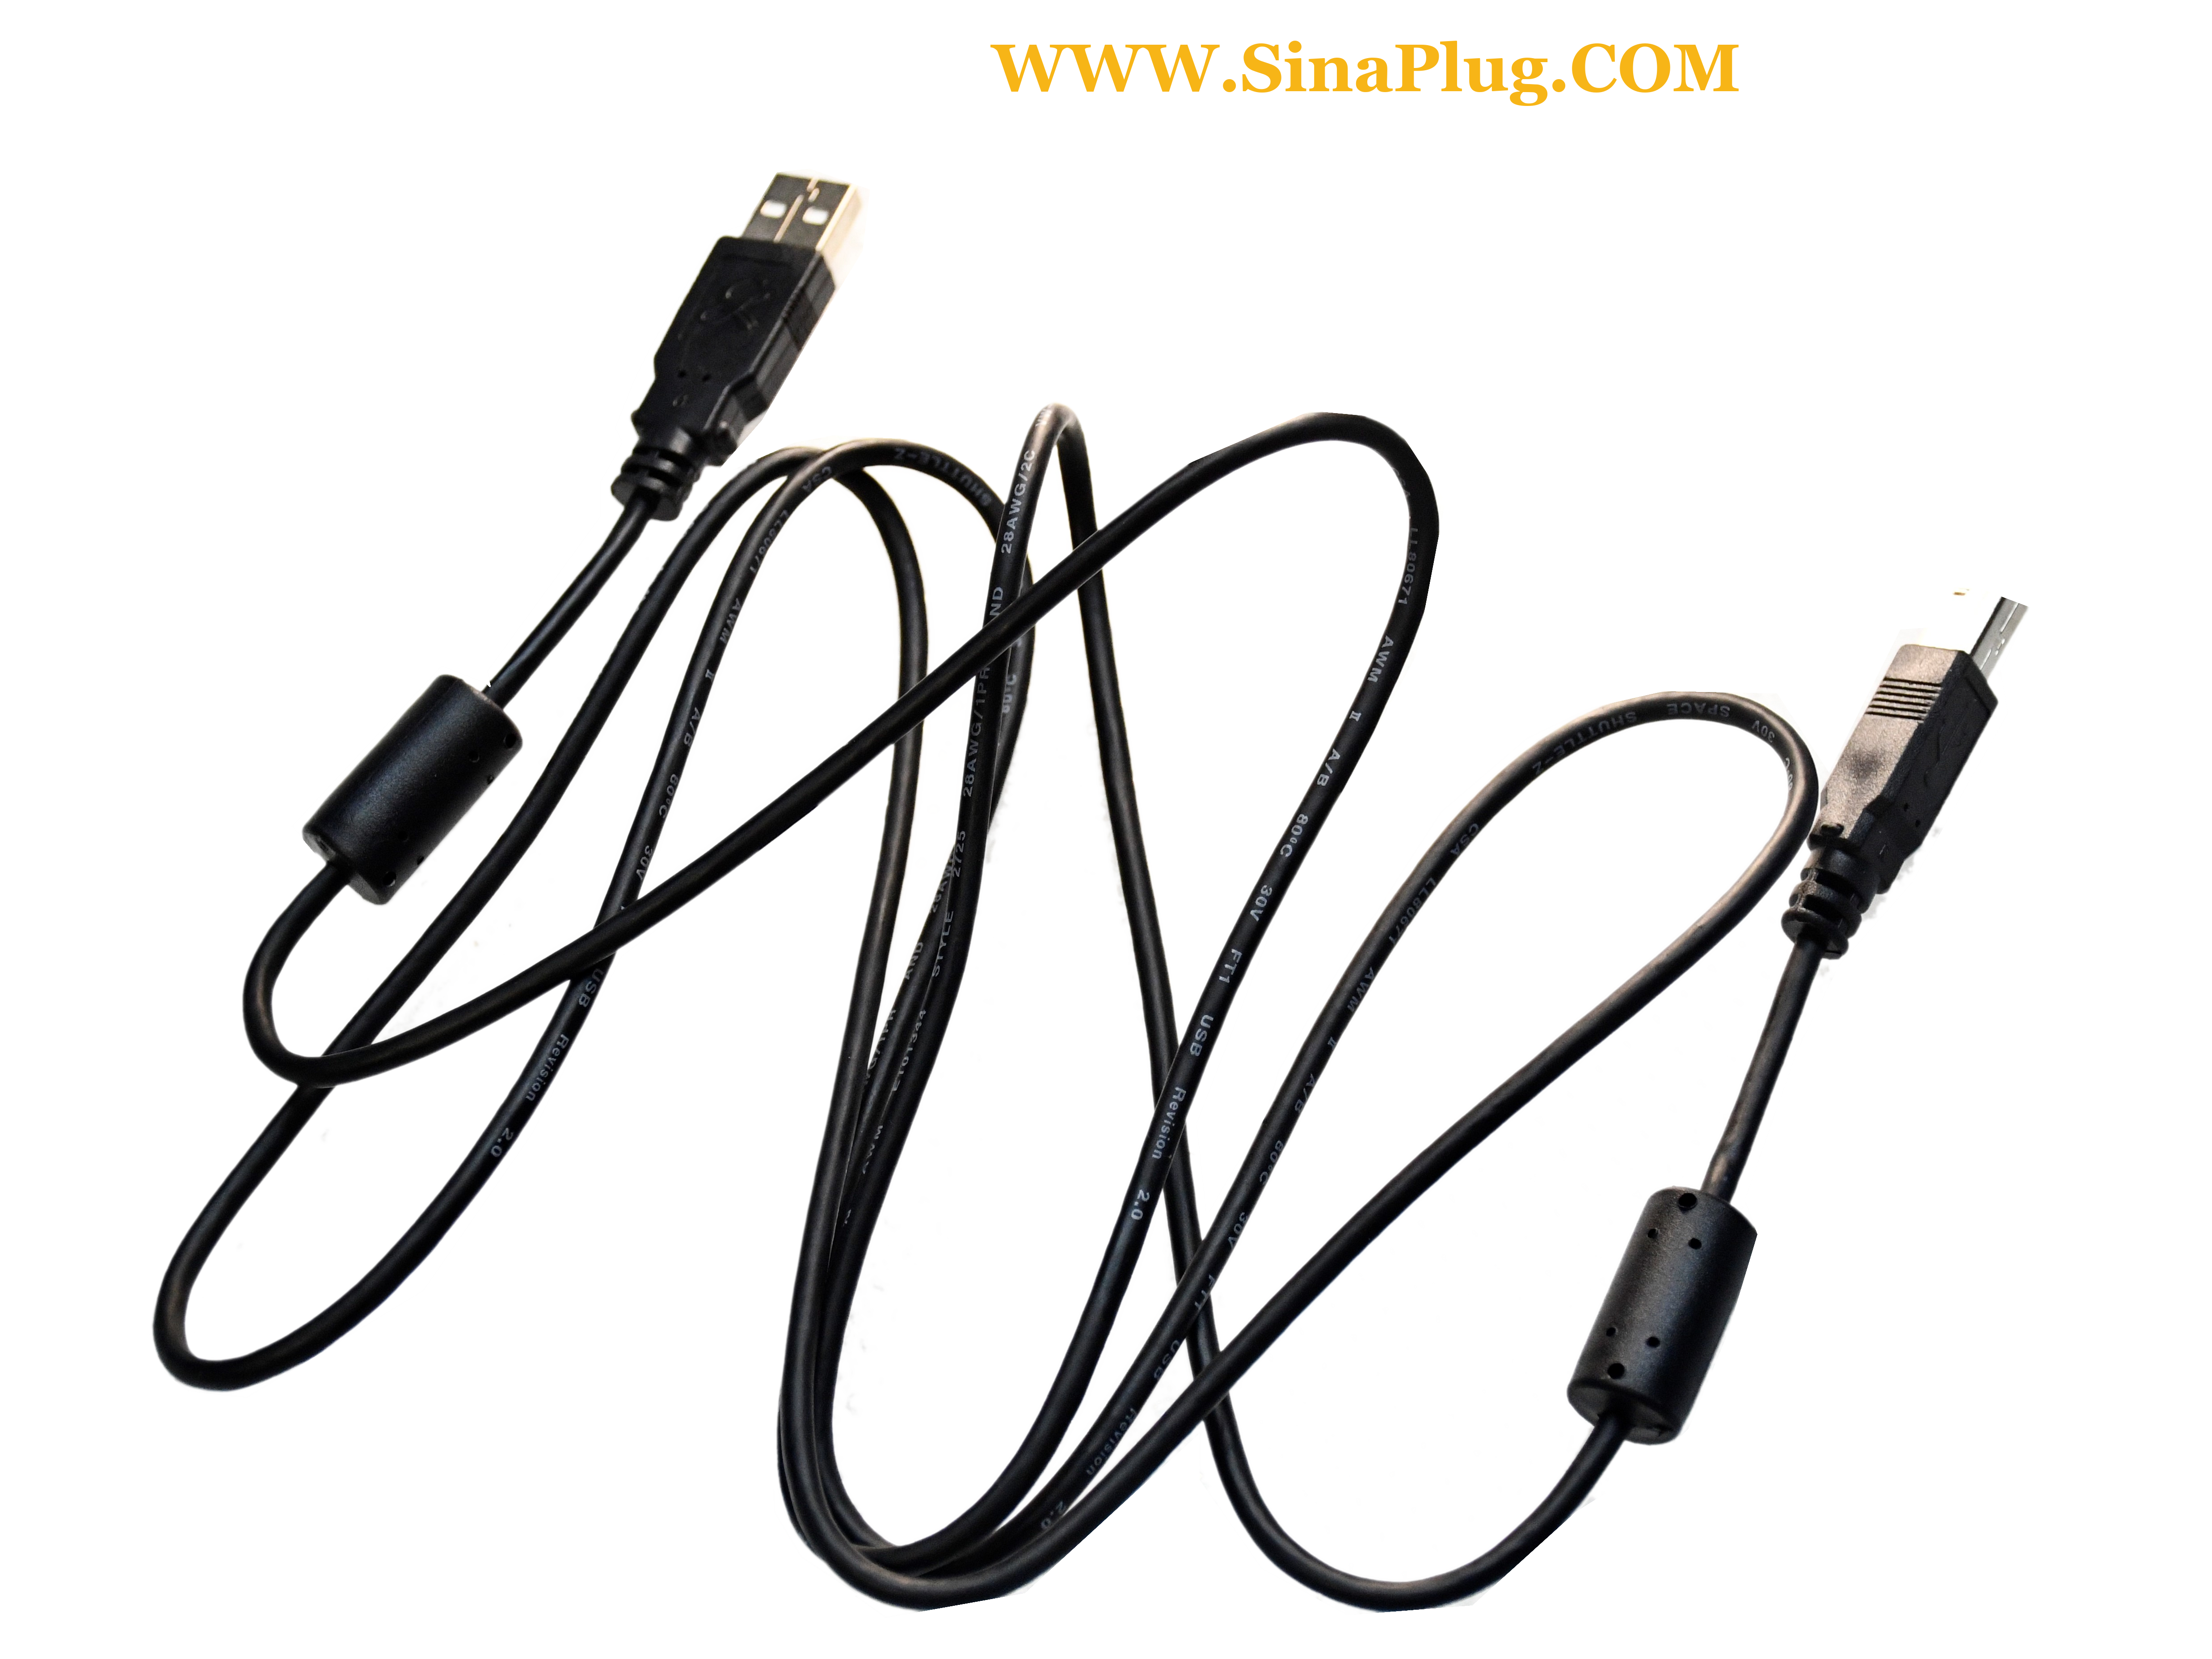 Night Runner Cables – Space Cables